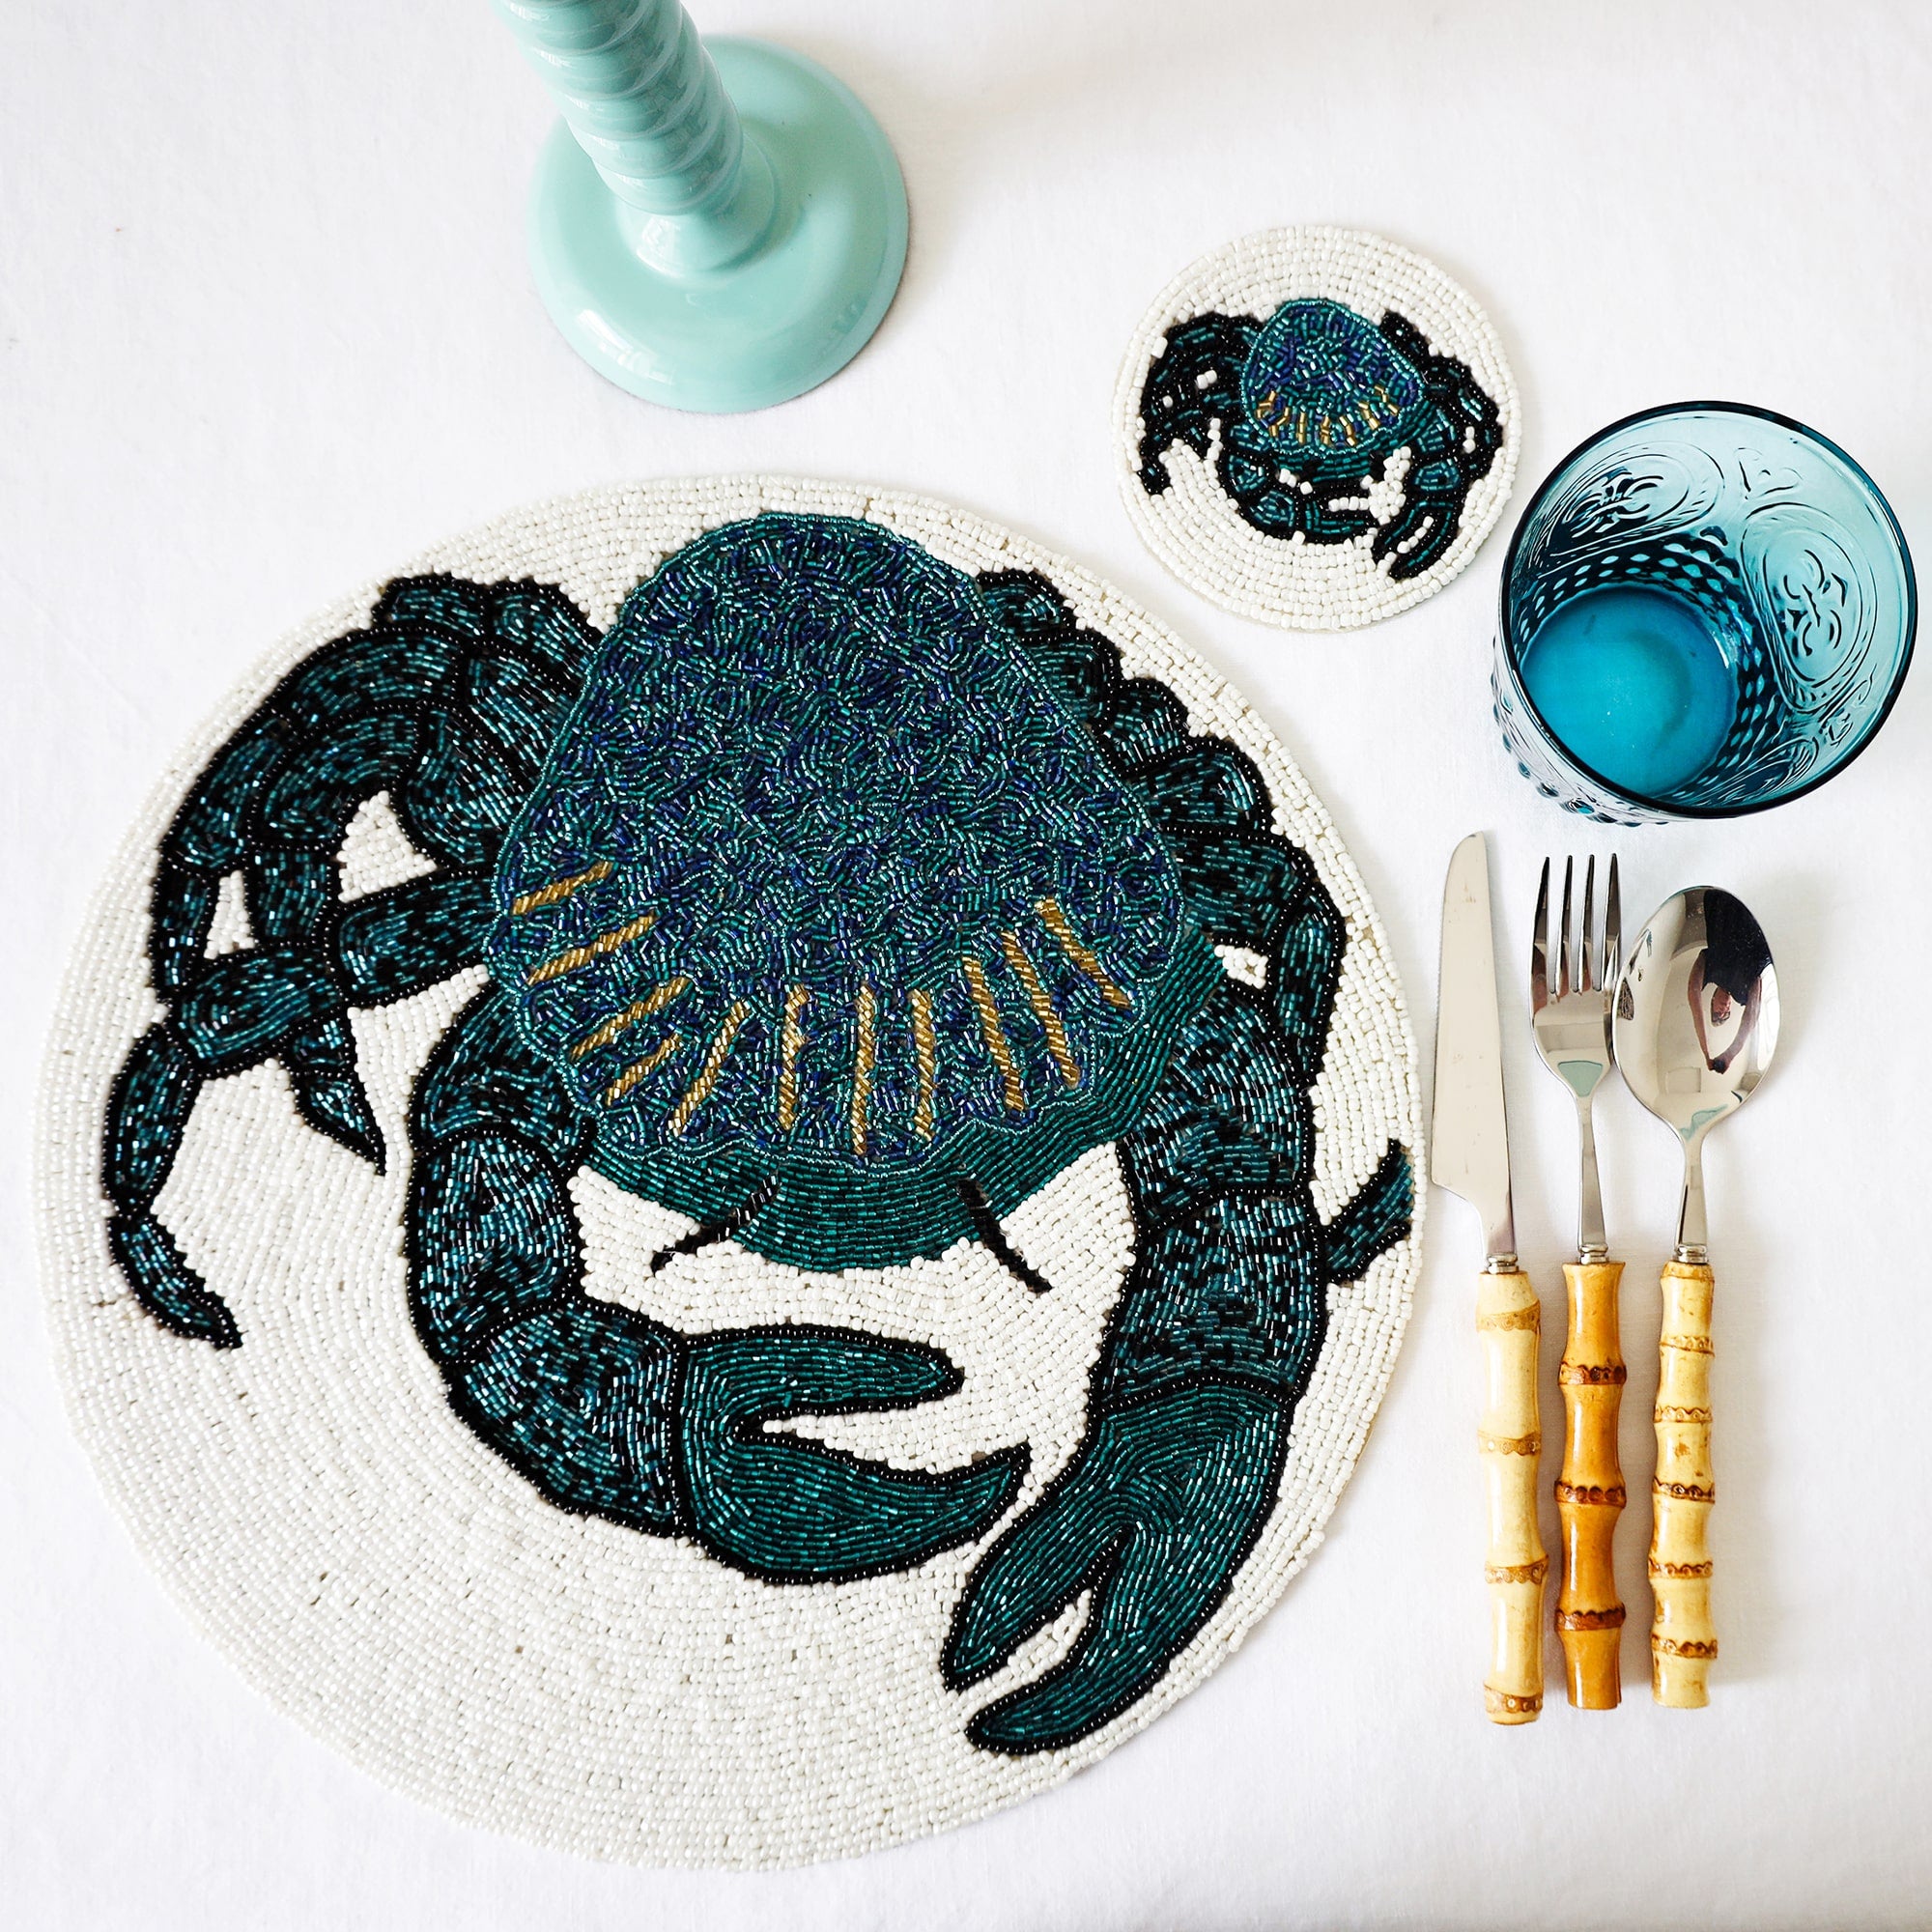 Handmade glass beaded placemat with a Crab design in Navy,Black and gold on white glass beads in a place setting with cutlery,a glass and a candlestick